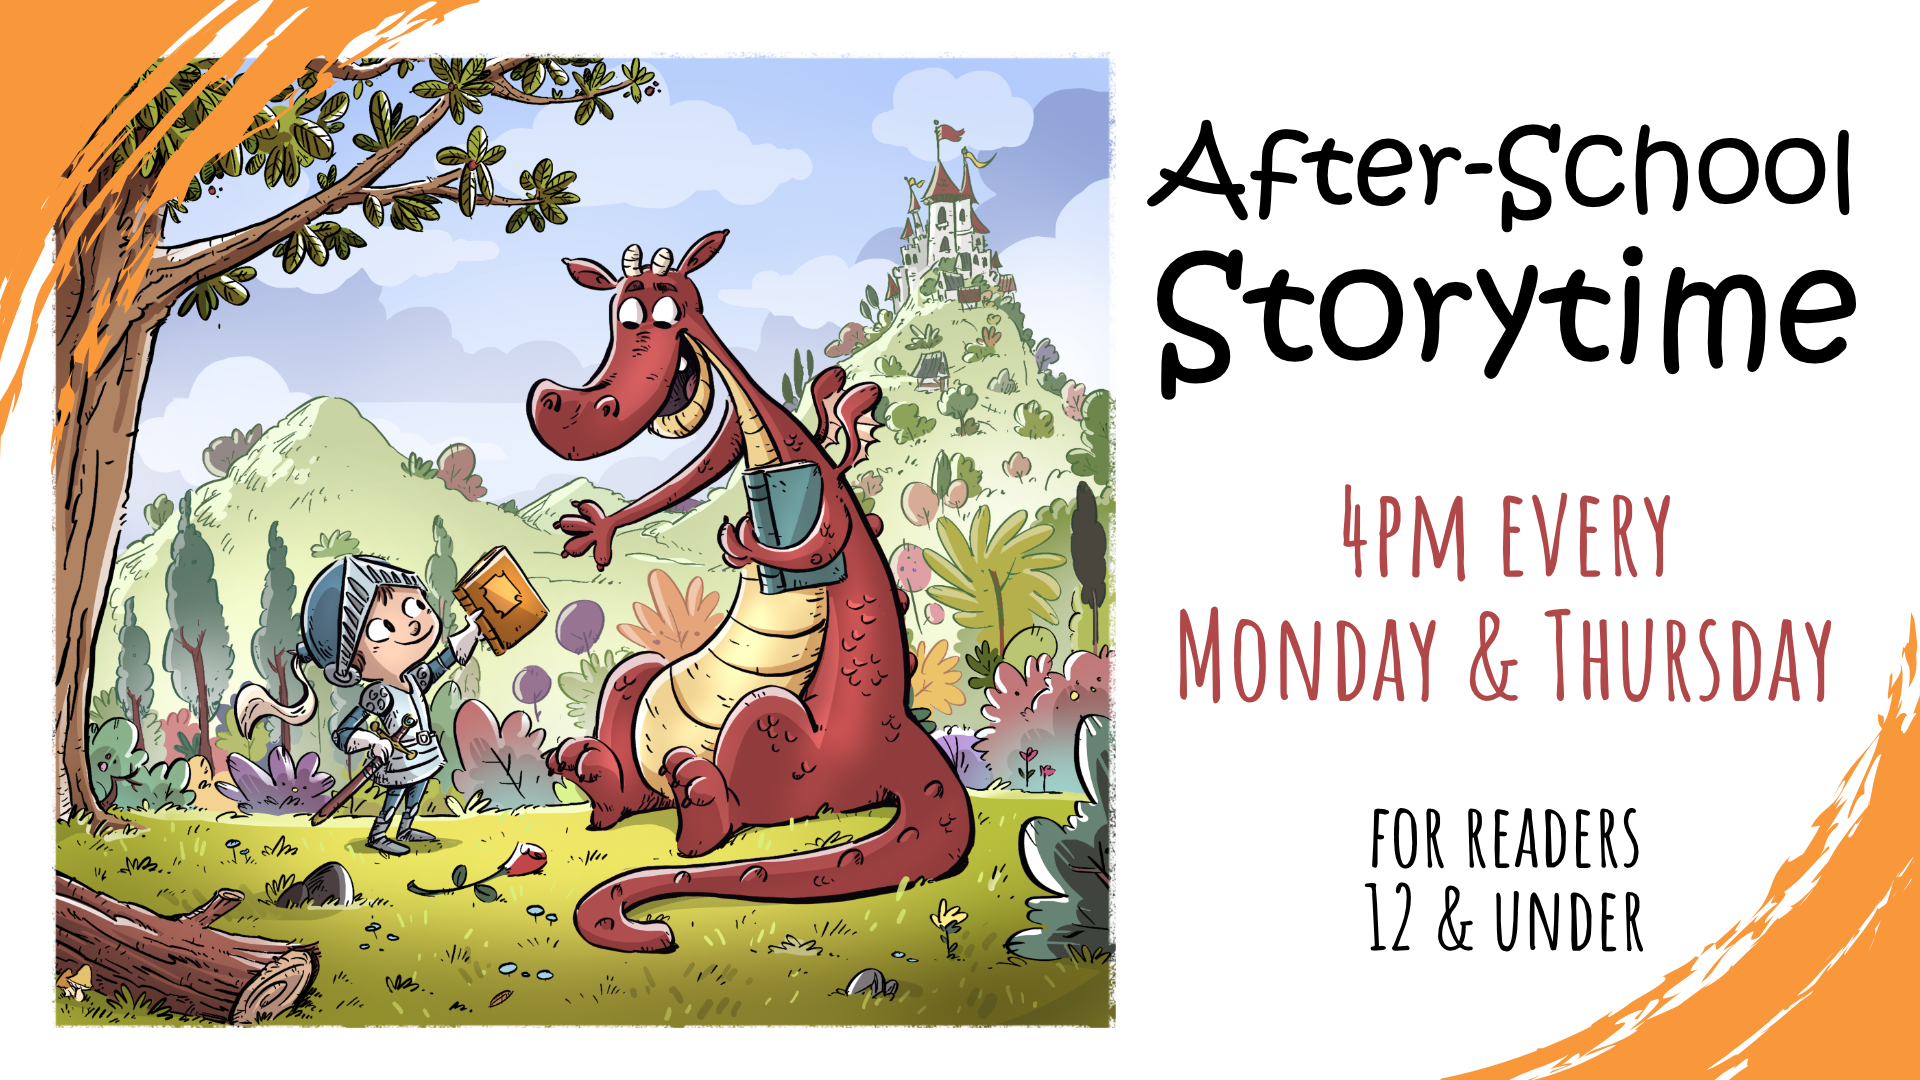 After-School Storytime, Mondays and Thursdays weekly at 4pm, intended for ages 12 and under